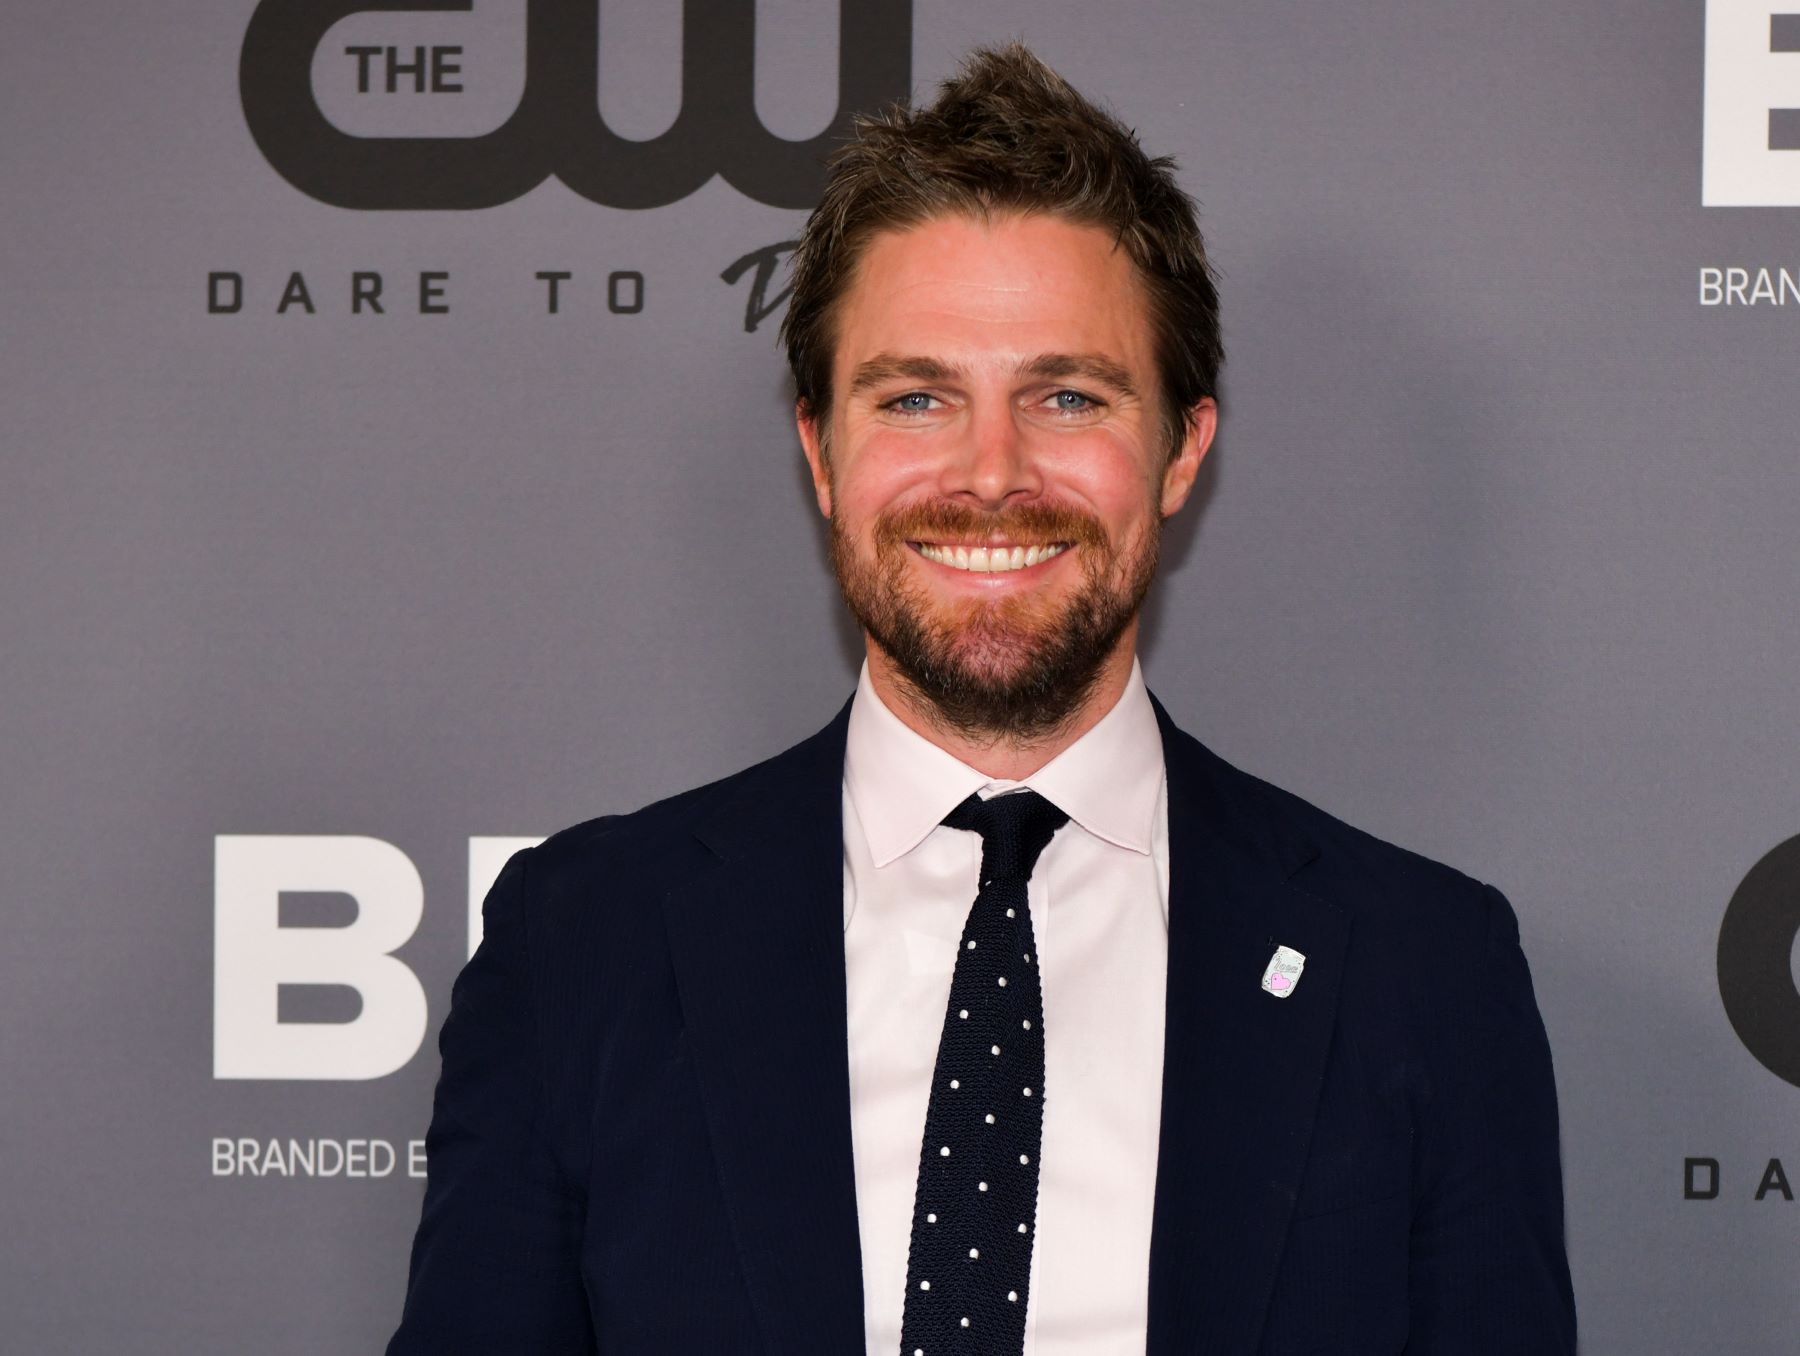 'Arrow' star Stephen Amell, in a suit and tie, smiles for cameras at The CW's Summer 2019 TCA Party.